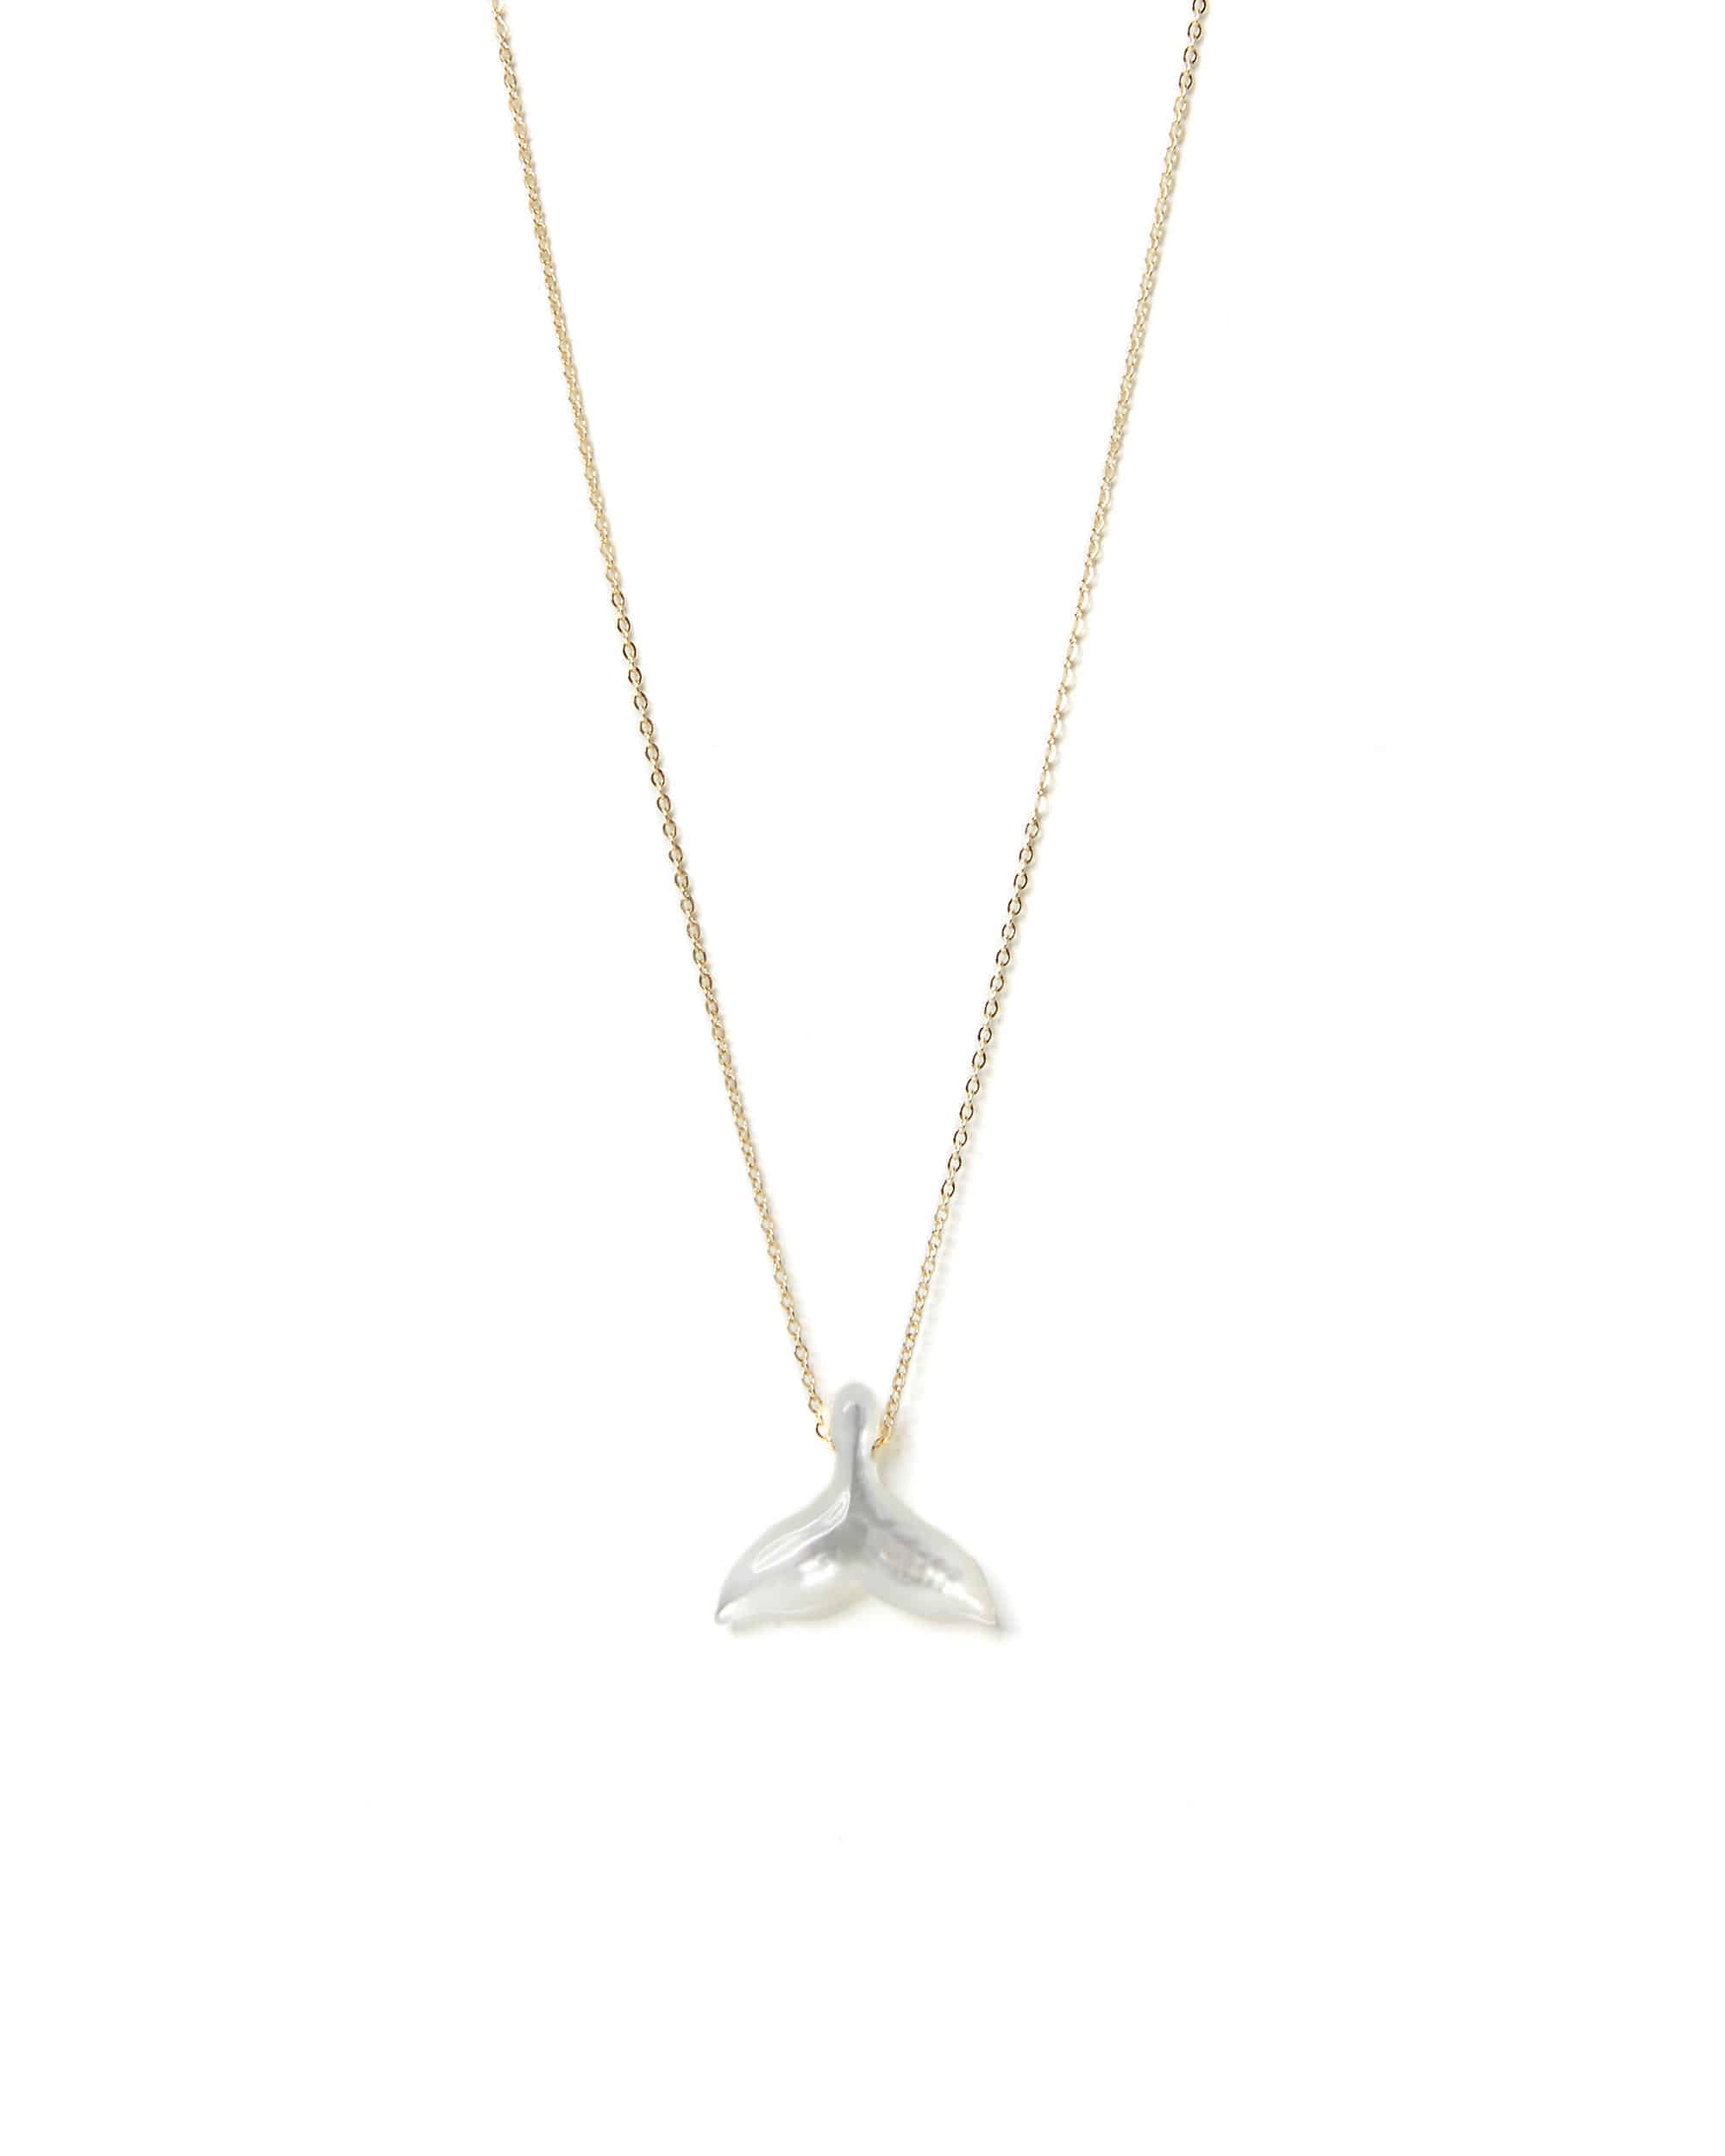 Dolphin Tail White mother-of-pearl Necklace